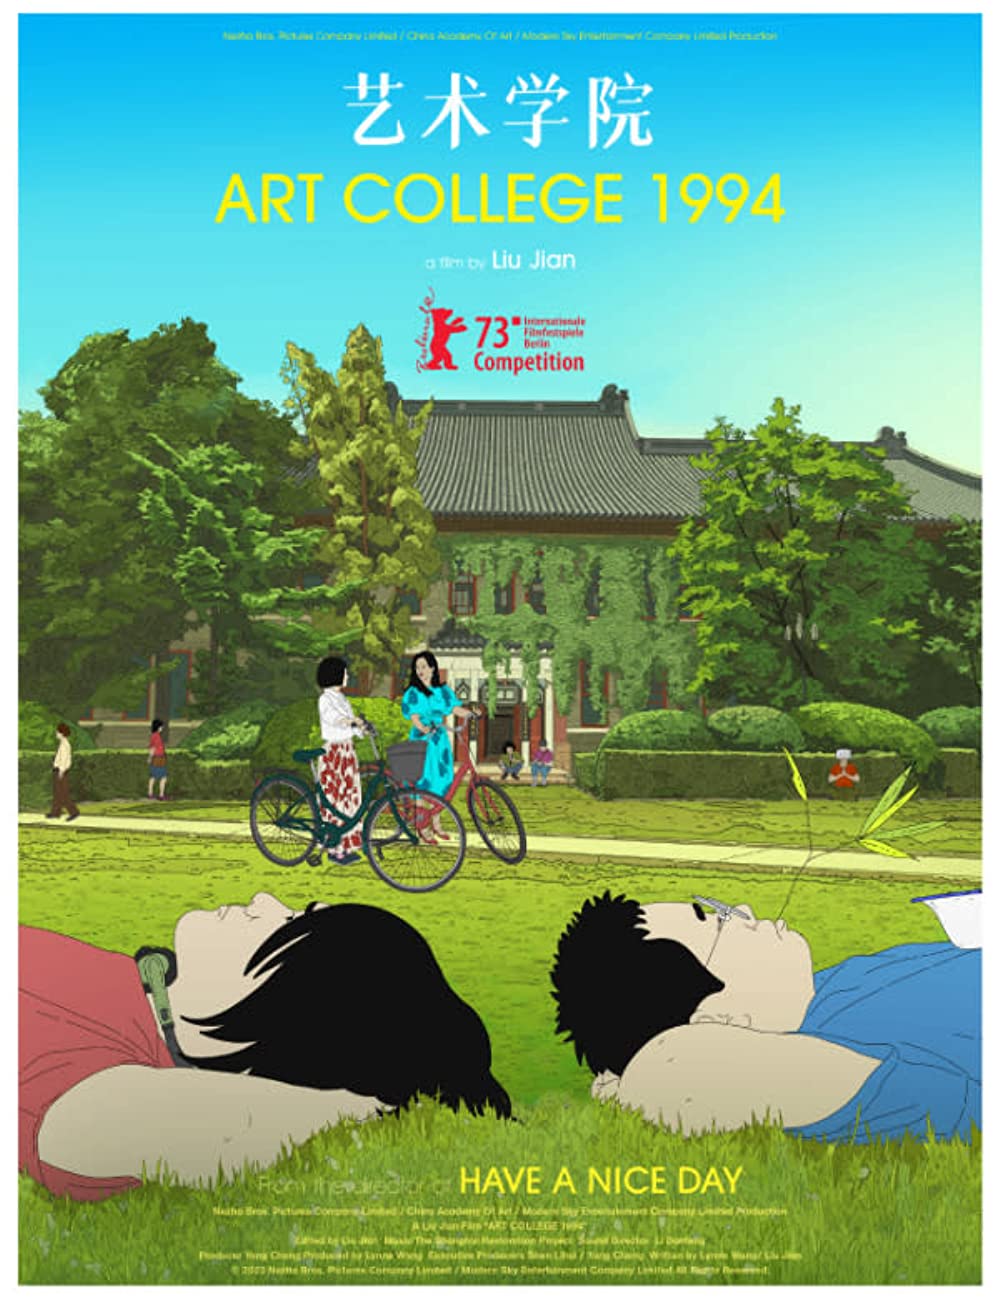 Art College 1994 Movie (2023) Cast, Release Date, Story, Budget, Collection, Poster, Trailer, Review